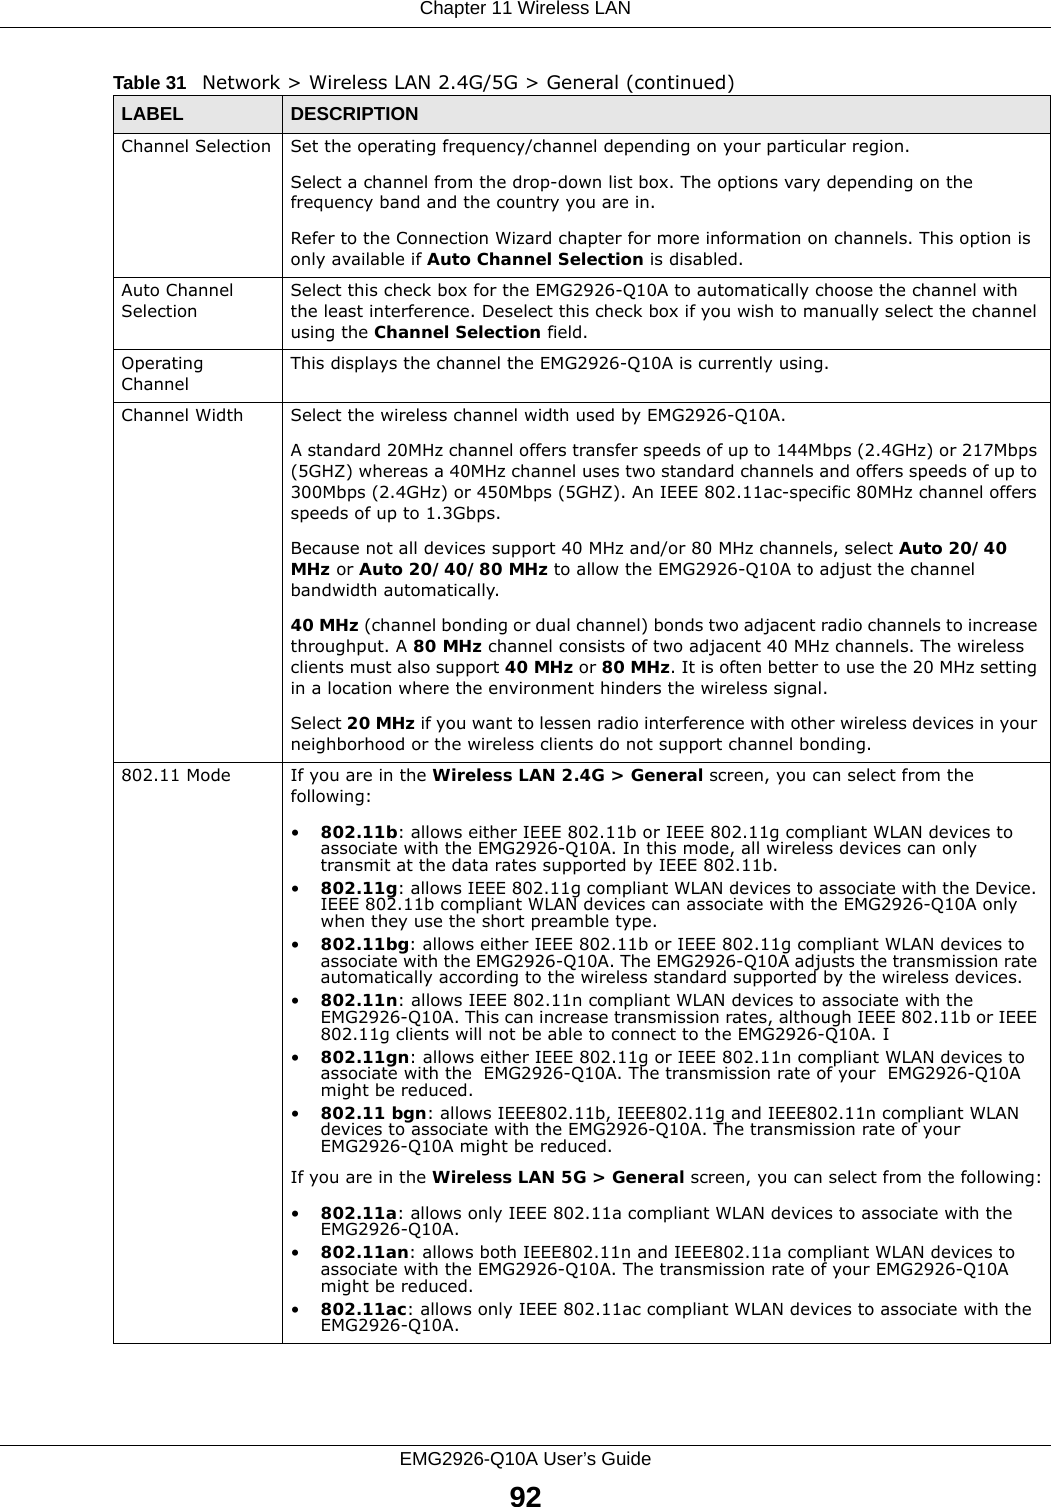 Chapter 11 Wireless LANEMG2926-Q10A User’s Guide92Channel Selection Set the operating frequency/channel depending on your particular region. Select a channel from the drop-down list box. The options vary depending on the frequency band and the country you are in.Refer to the Connection Wizard chapter for more information on channels. This option is only available if Auto Channel Selection is disabled.Auto Channel SelectionSelect this check box for the EMG2926-Q10A to automatically choose the channel with the least interference. Deselect this check box if you wish to manually select the channel using the Channel Selection field.Operating Channel This displays the channel the EMG2926-Q10A is currently using.Channel Width Select the wireless channel width used by EMG2926-Q10A.A standard 20MHz channel offers transfer speeds of up to 144Mbps (2.4GHz) or 217Mbps (5GHZ) whereas a 40MHz channel uses two standard channels and offers speeds of up to 300Mbps (2.4GHz) or 450Mbps (5GHZ). An IEEE 802.11ac-specific 80MHz channel offers speeds of up to 1.3Gbps.Because not all devices support 40 MHz and/or 80 MHz channels, select Auto 20/40 MHz or Auto 20/40/80 MHz to allow the EMG2926-Q10A to adjust the channel bandwidth automatically.40 MHz (channel bonding or dual channel) bonds two adjacent radio channels to increase throughput. A 80 MHz channel consists of two adjacent 40 MHz channels. The wireless clients must also support 40 MHz or 80 MHz. It is often better to use the 20 MHz setting in a location where the environment hinders the wireless signal. Select 20 MHz if you want to lessen radio interference with other wireless devices in your neighborhood or the wireless clients do not support channel bonding.802.11 Mode If you are in the Wireless LAN 2.4G &gt; General screen, you can select from the following:•802.11b: allows either IEEE 802.11b or IEEE 802.11g compliant WLAN devices to associate with the EMG2926-Q10A. In this mode, all wireless devices can only transmit at the data rates supported by IEEE 802.11b.•802.11g: allows IEEE 802.11g compliant WLAN devices to associate with the Device. IEEE 802.11b compliant WLAN devices can associate with the EMG2926-Q10A only when they use the short preamble type.•802.11bg: allows either IEEE 802.11b or IEEE 802.11g compliant WLAN devices to associate with the EMG2926-Q10A. The EMG2926-Q10A adjusts the transmission rate automatically according to the wireless standard supported by the wireless devices.•802.11n: allows IEEE 802.11n compliant WLAN devices to associate with the EMG2926-Q10A. This can increase transmission rates, although IEEE 802.11b or IEEE 802.11g clients will not be able to connect to the EMG2926-Q10A. I•802.11gn: allows either IEEE 802.11g or IEEE 802.11n compliant WLAN devices to associate with the  EMG2926-Q10A. The transmission rate of your  EMG2926-Q10A might be reduced.•802.11 bgn: allows IEEE802.11b, IEEE802.11g and IEEE802.11n compliant WLAN devices to associate with the EMG2926-Q10A. The transmission rate of your EMG2926-Q10A might be reduced.If you are in the Wireless LAN 5G &gt; General screen, you can select from the following:•802.11a: allows only IEEE 802.11a compliant WLAN devices to associate with the EMG2926-Q10A.•802.11an: allows both IEEE802.11n and IEEE802.11a compliant WLAN devices to associate with the EMG2926-Q10A. The transmission rate of your EMG2926-Q10A might be reduced.•802.11ac: allows only IEEE 802.11ac compliant WLAN devices to associate with the EMG2926-Q10A.Table 31   Network &gt; Wireless LAN 2.4G/5G &gt; General (continued)LABEL DESCRIPTION